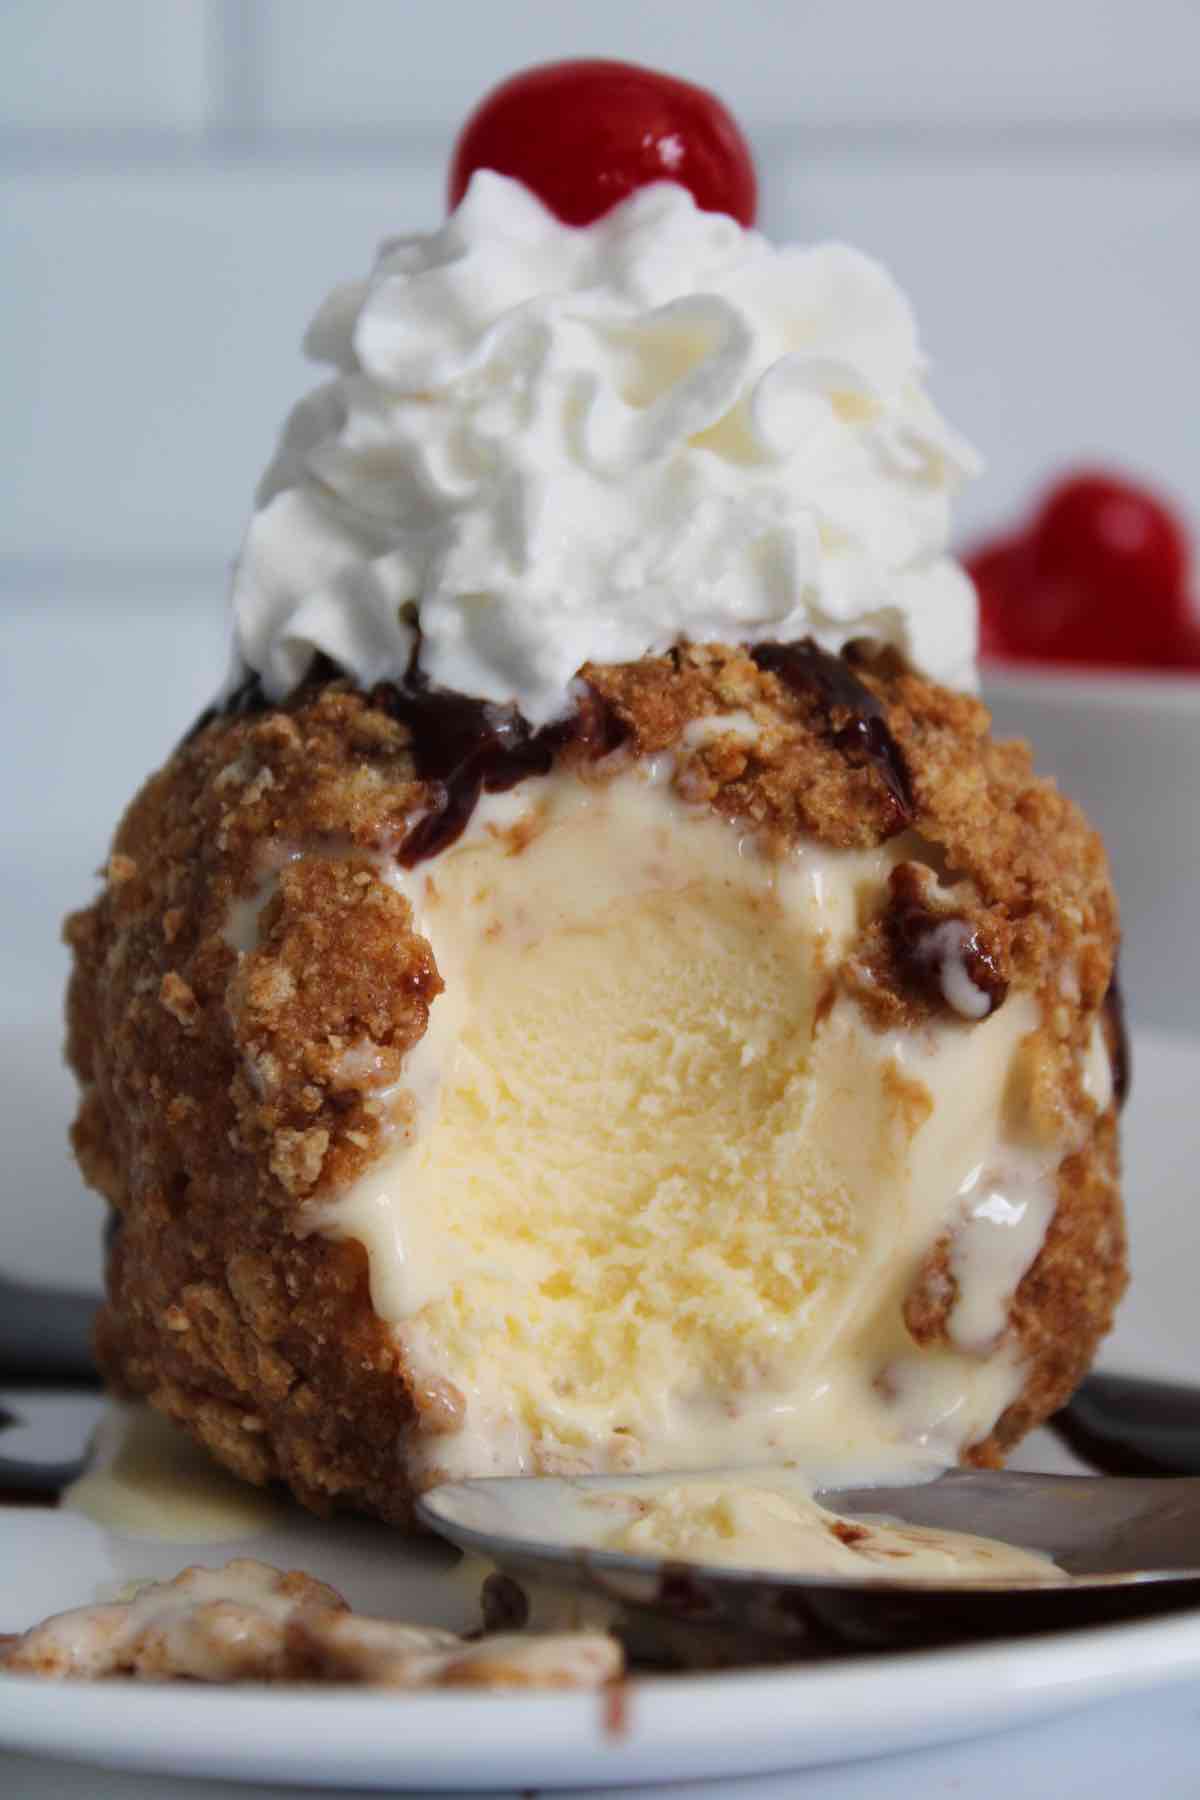 Making air fried ice cream is very easy. Additionally, this recipe is made with no eggs making it extremely simple even for beginners.